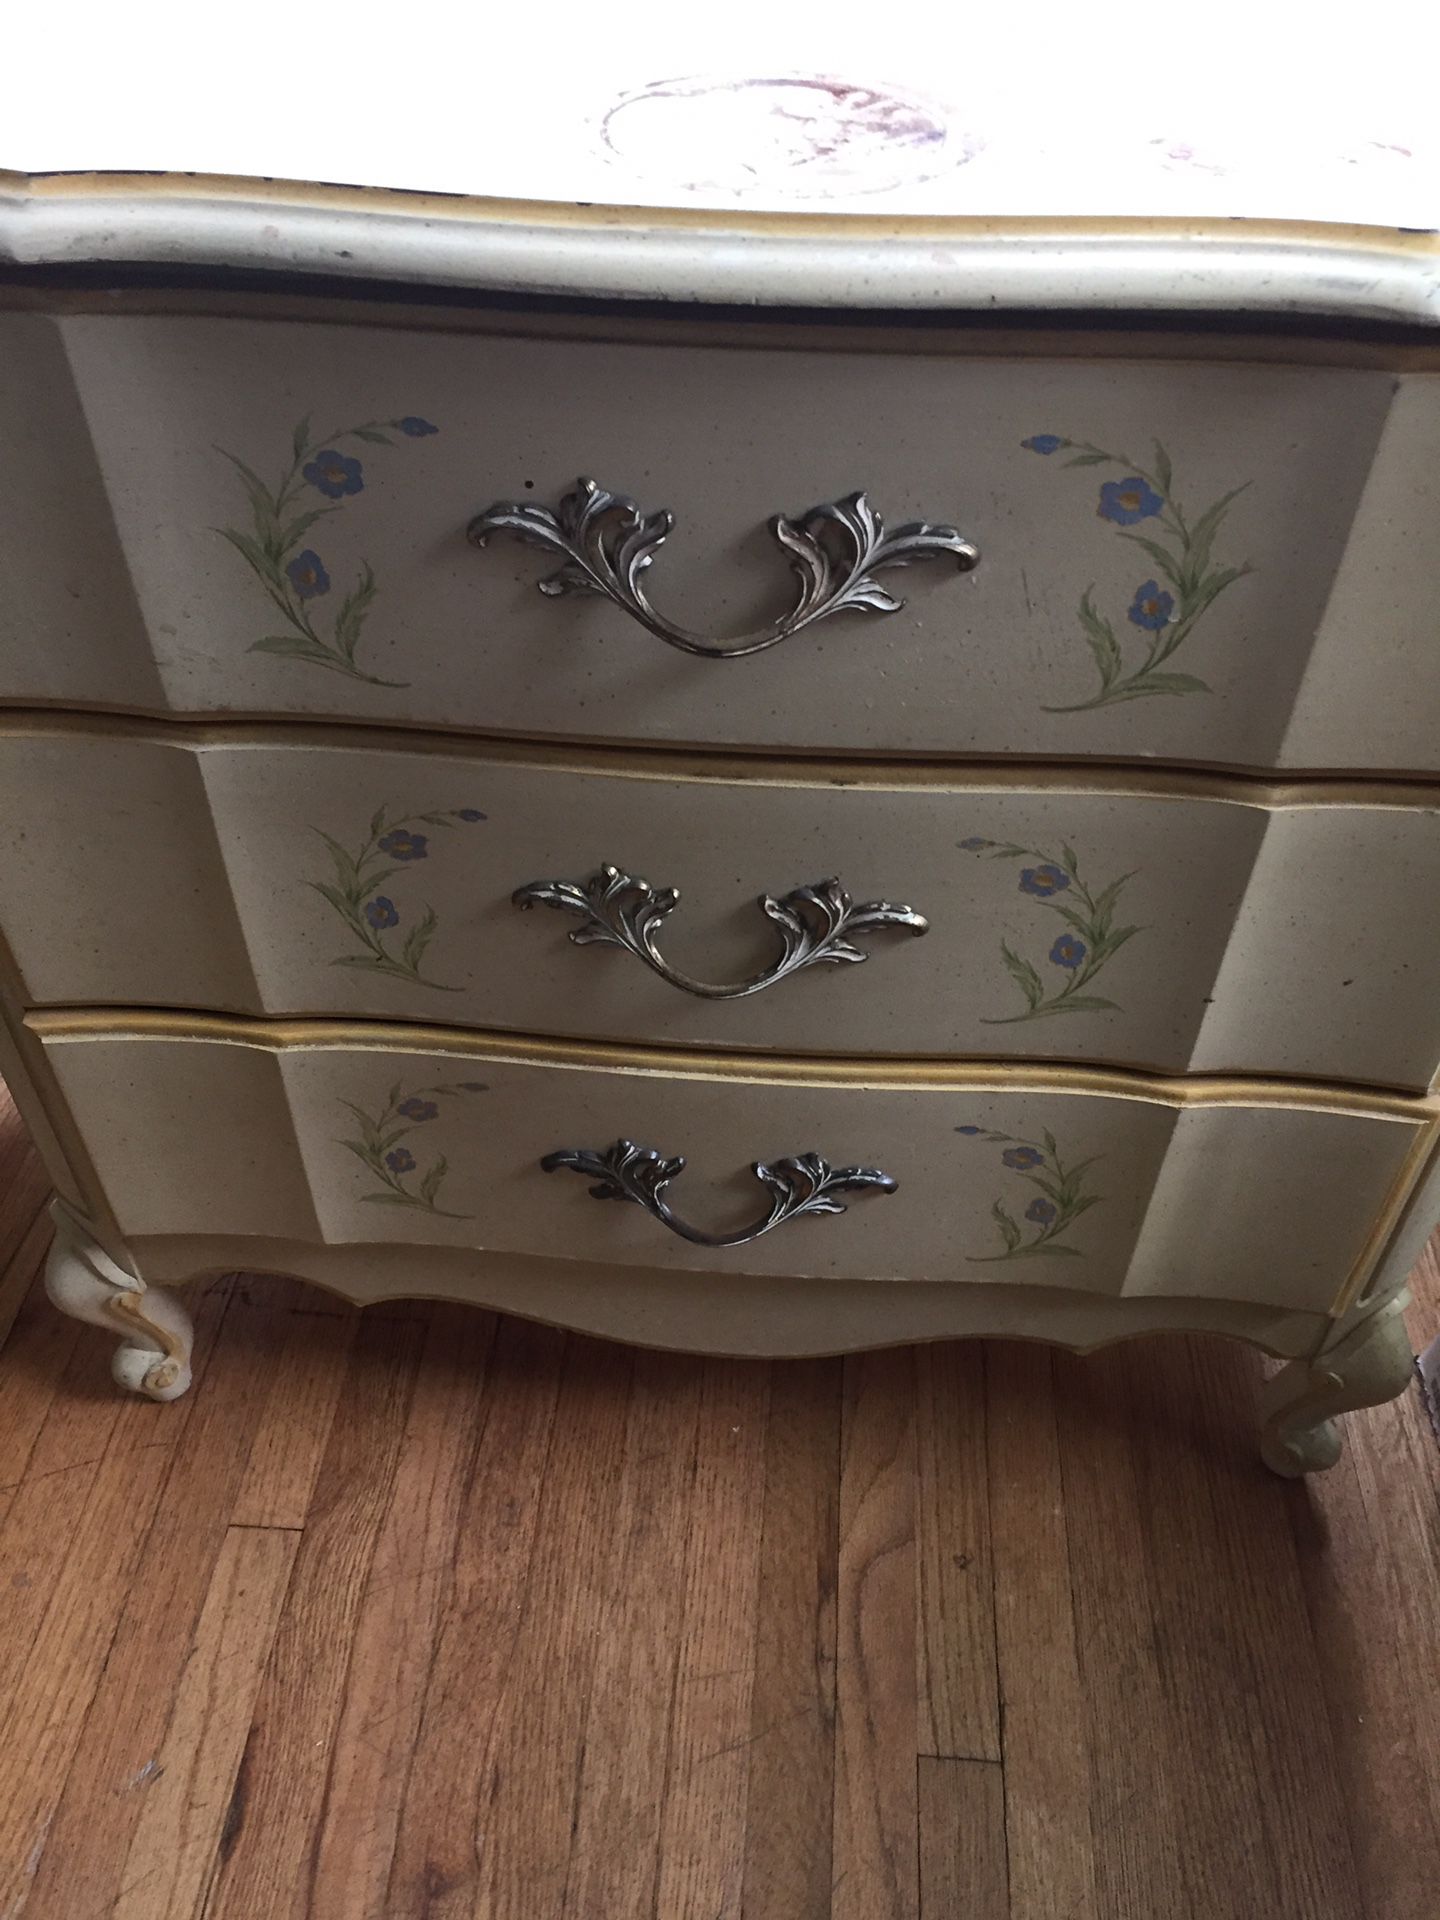 Two antique dressers